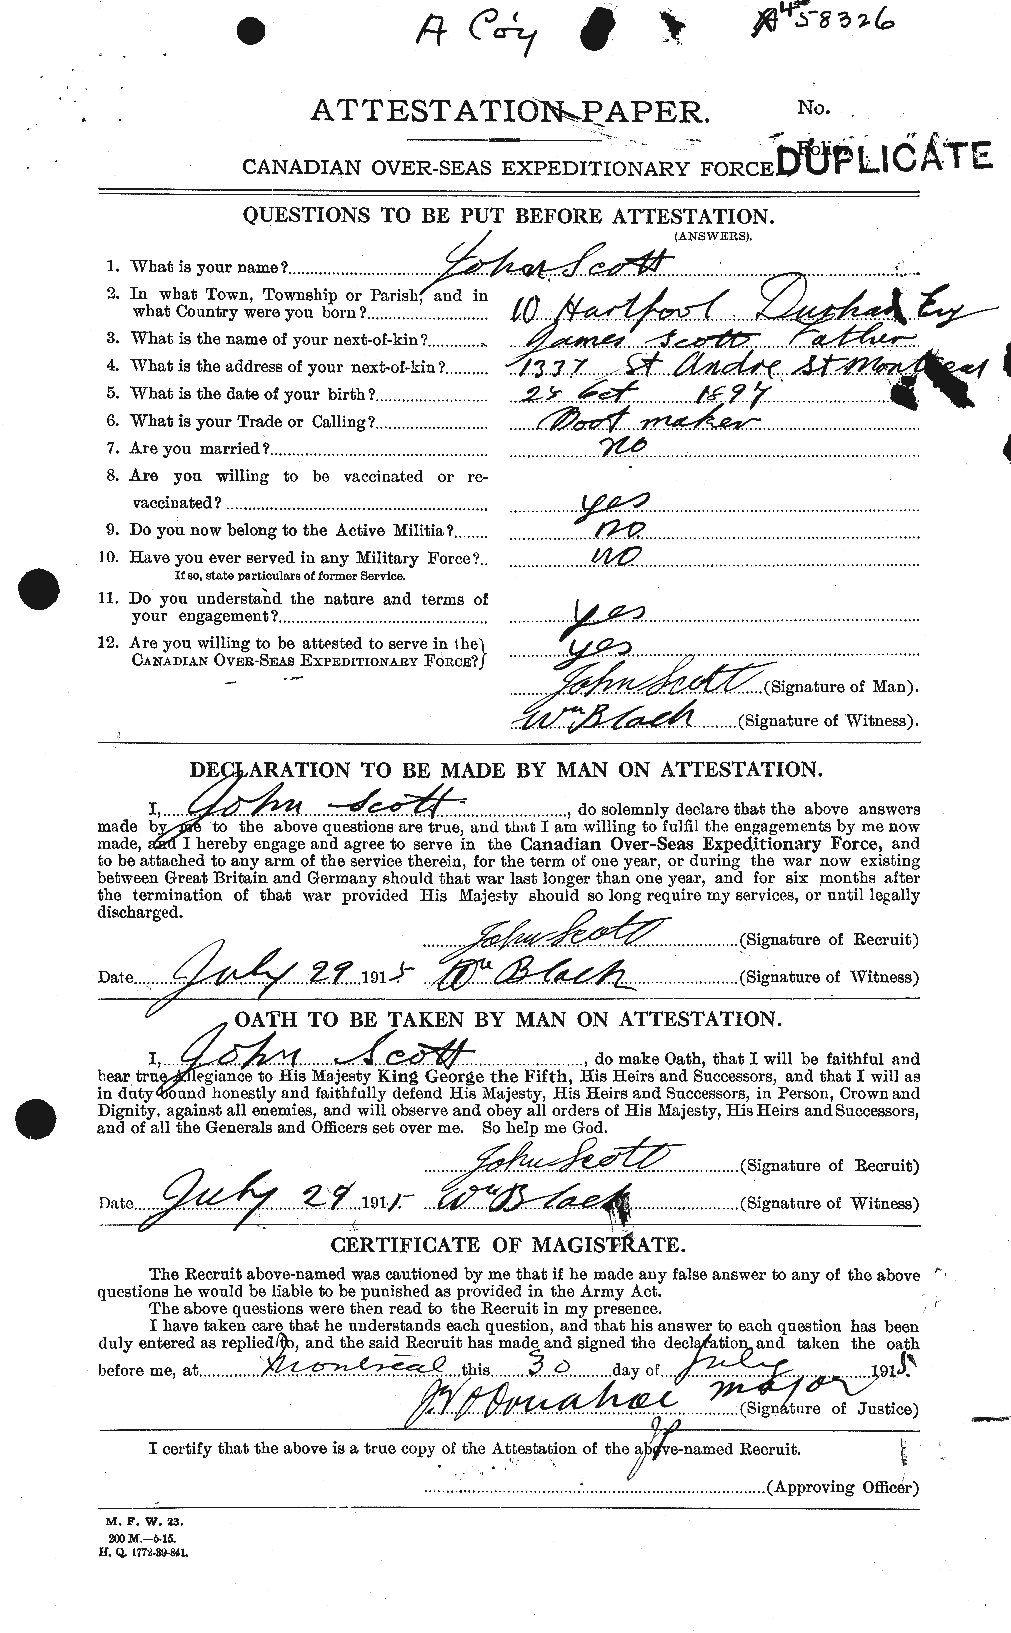 Personnel Records of the First World War - CEF 084911a